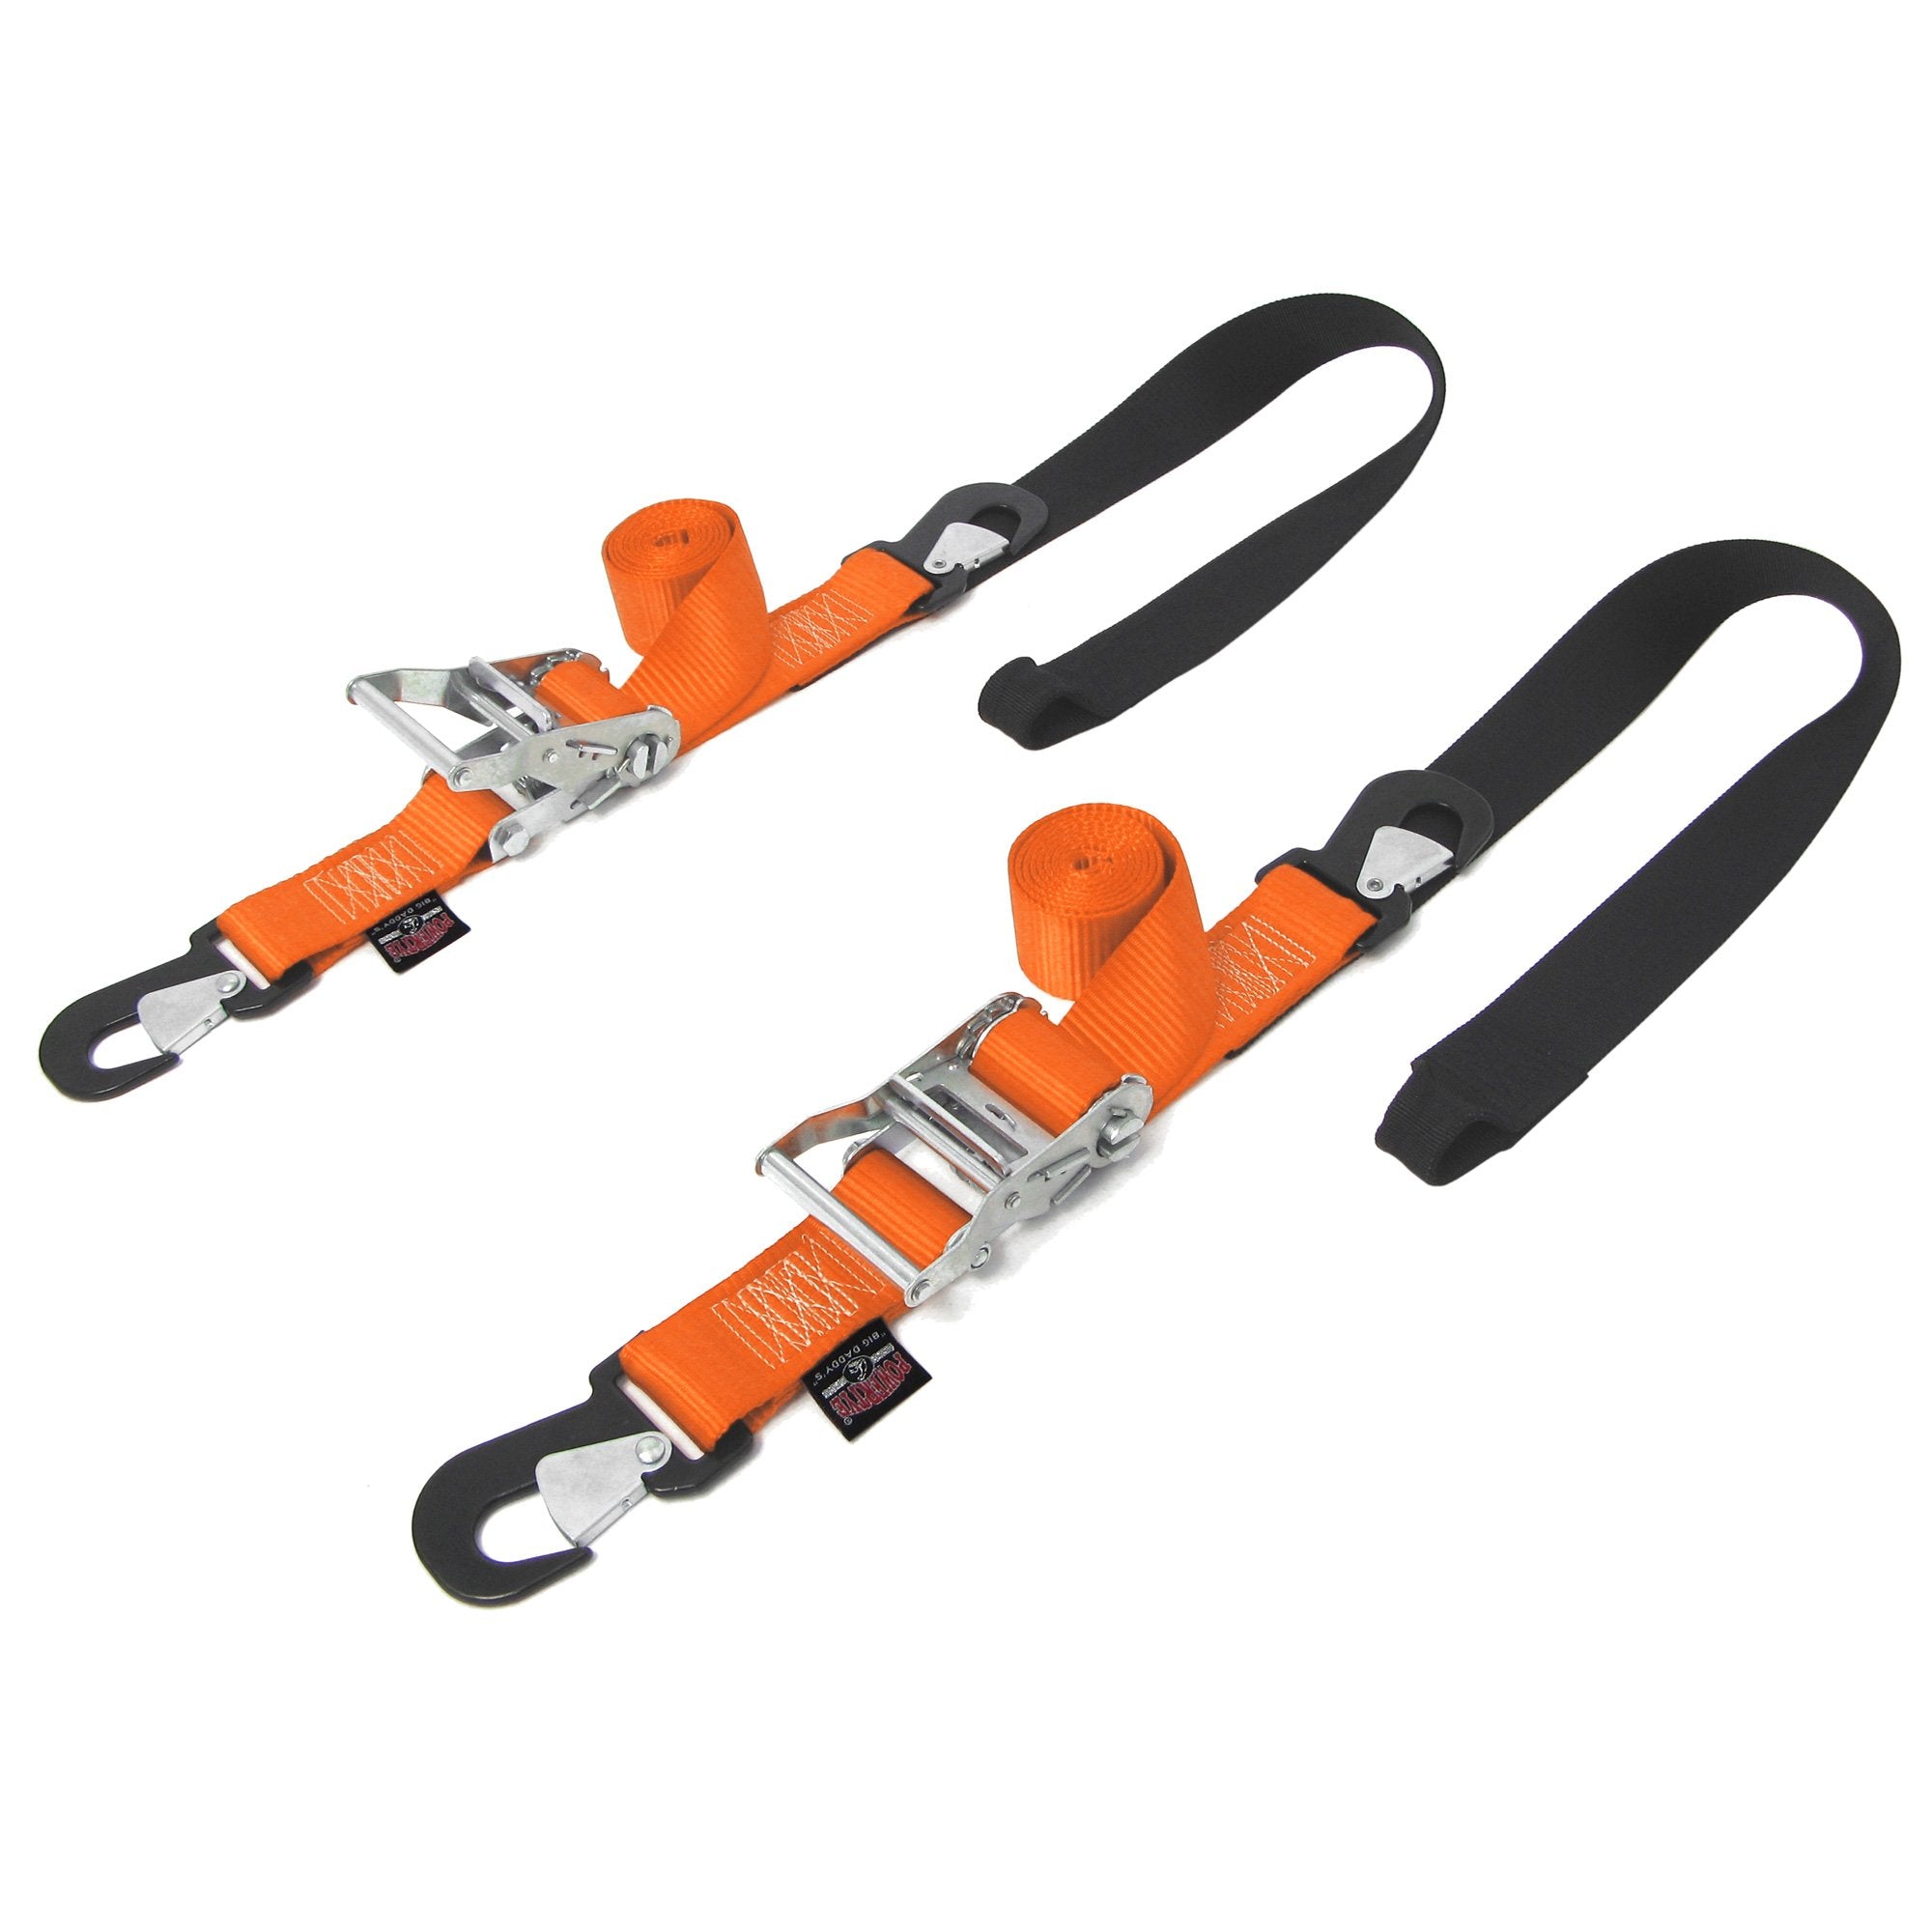 1.25 x 8' Easy Slide Ratchet Tie-Down Straps w/S Hooks  2 Ultimate  Adjustable Ratcheting Strap Cargo TieDowns w/NO Fixed End, Cargo Liners -   Canada